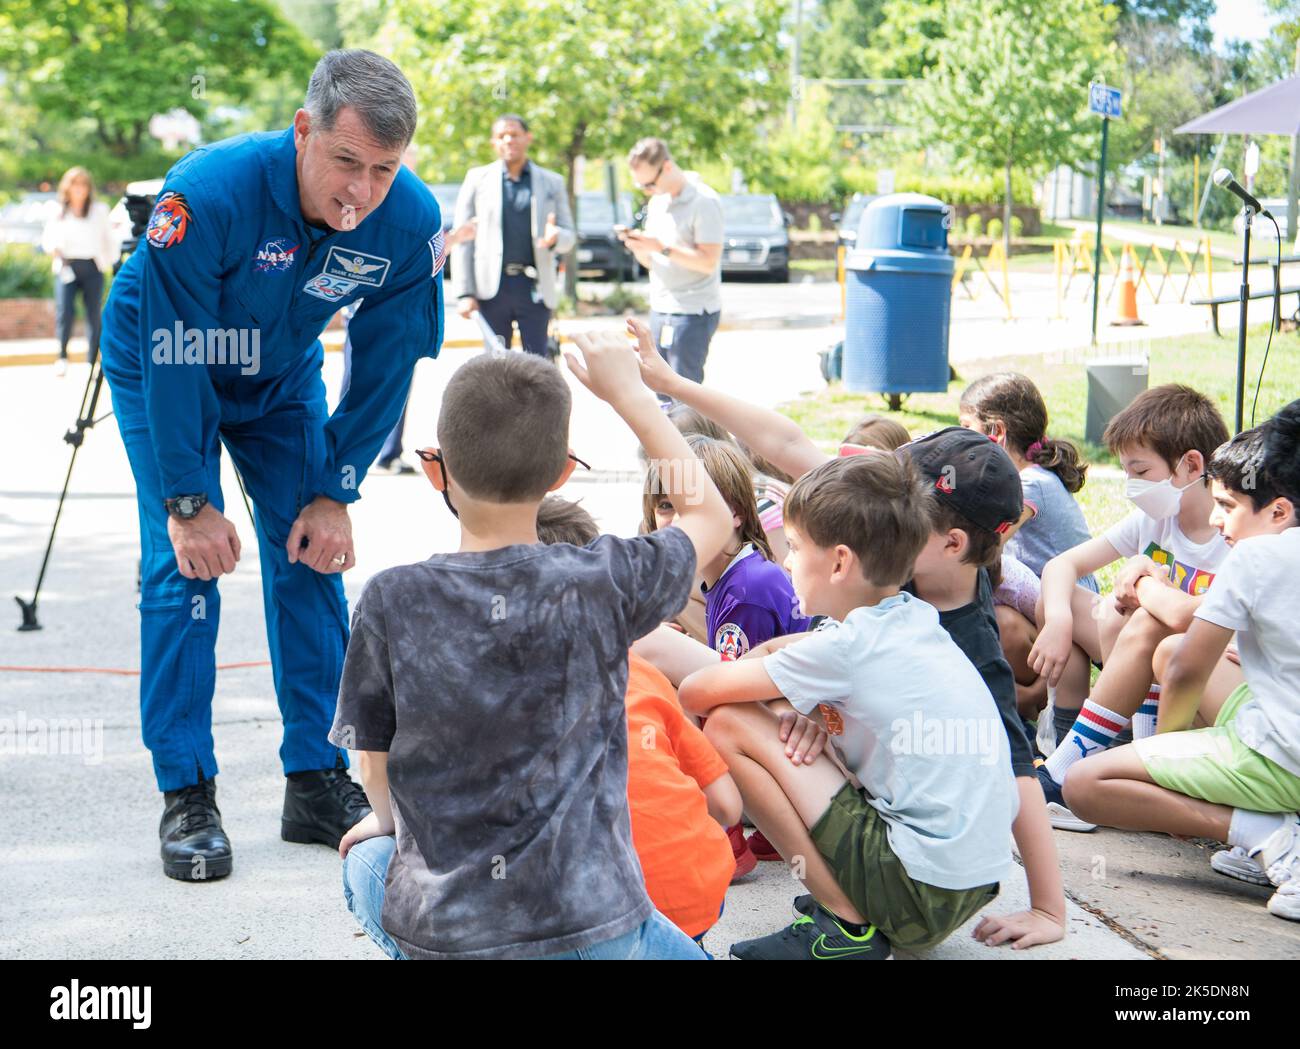 NASA’s SpaceX Crew-2 NASA astronaut Shane Kimbrough speaks to students during a visit to Arlington Science Focus Elementary School, Friday, June 10, 2022, in Arlington, Virginia. Stock Photo